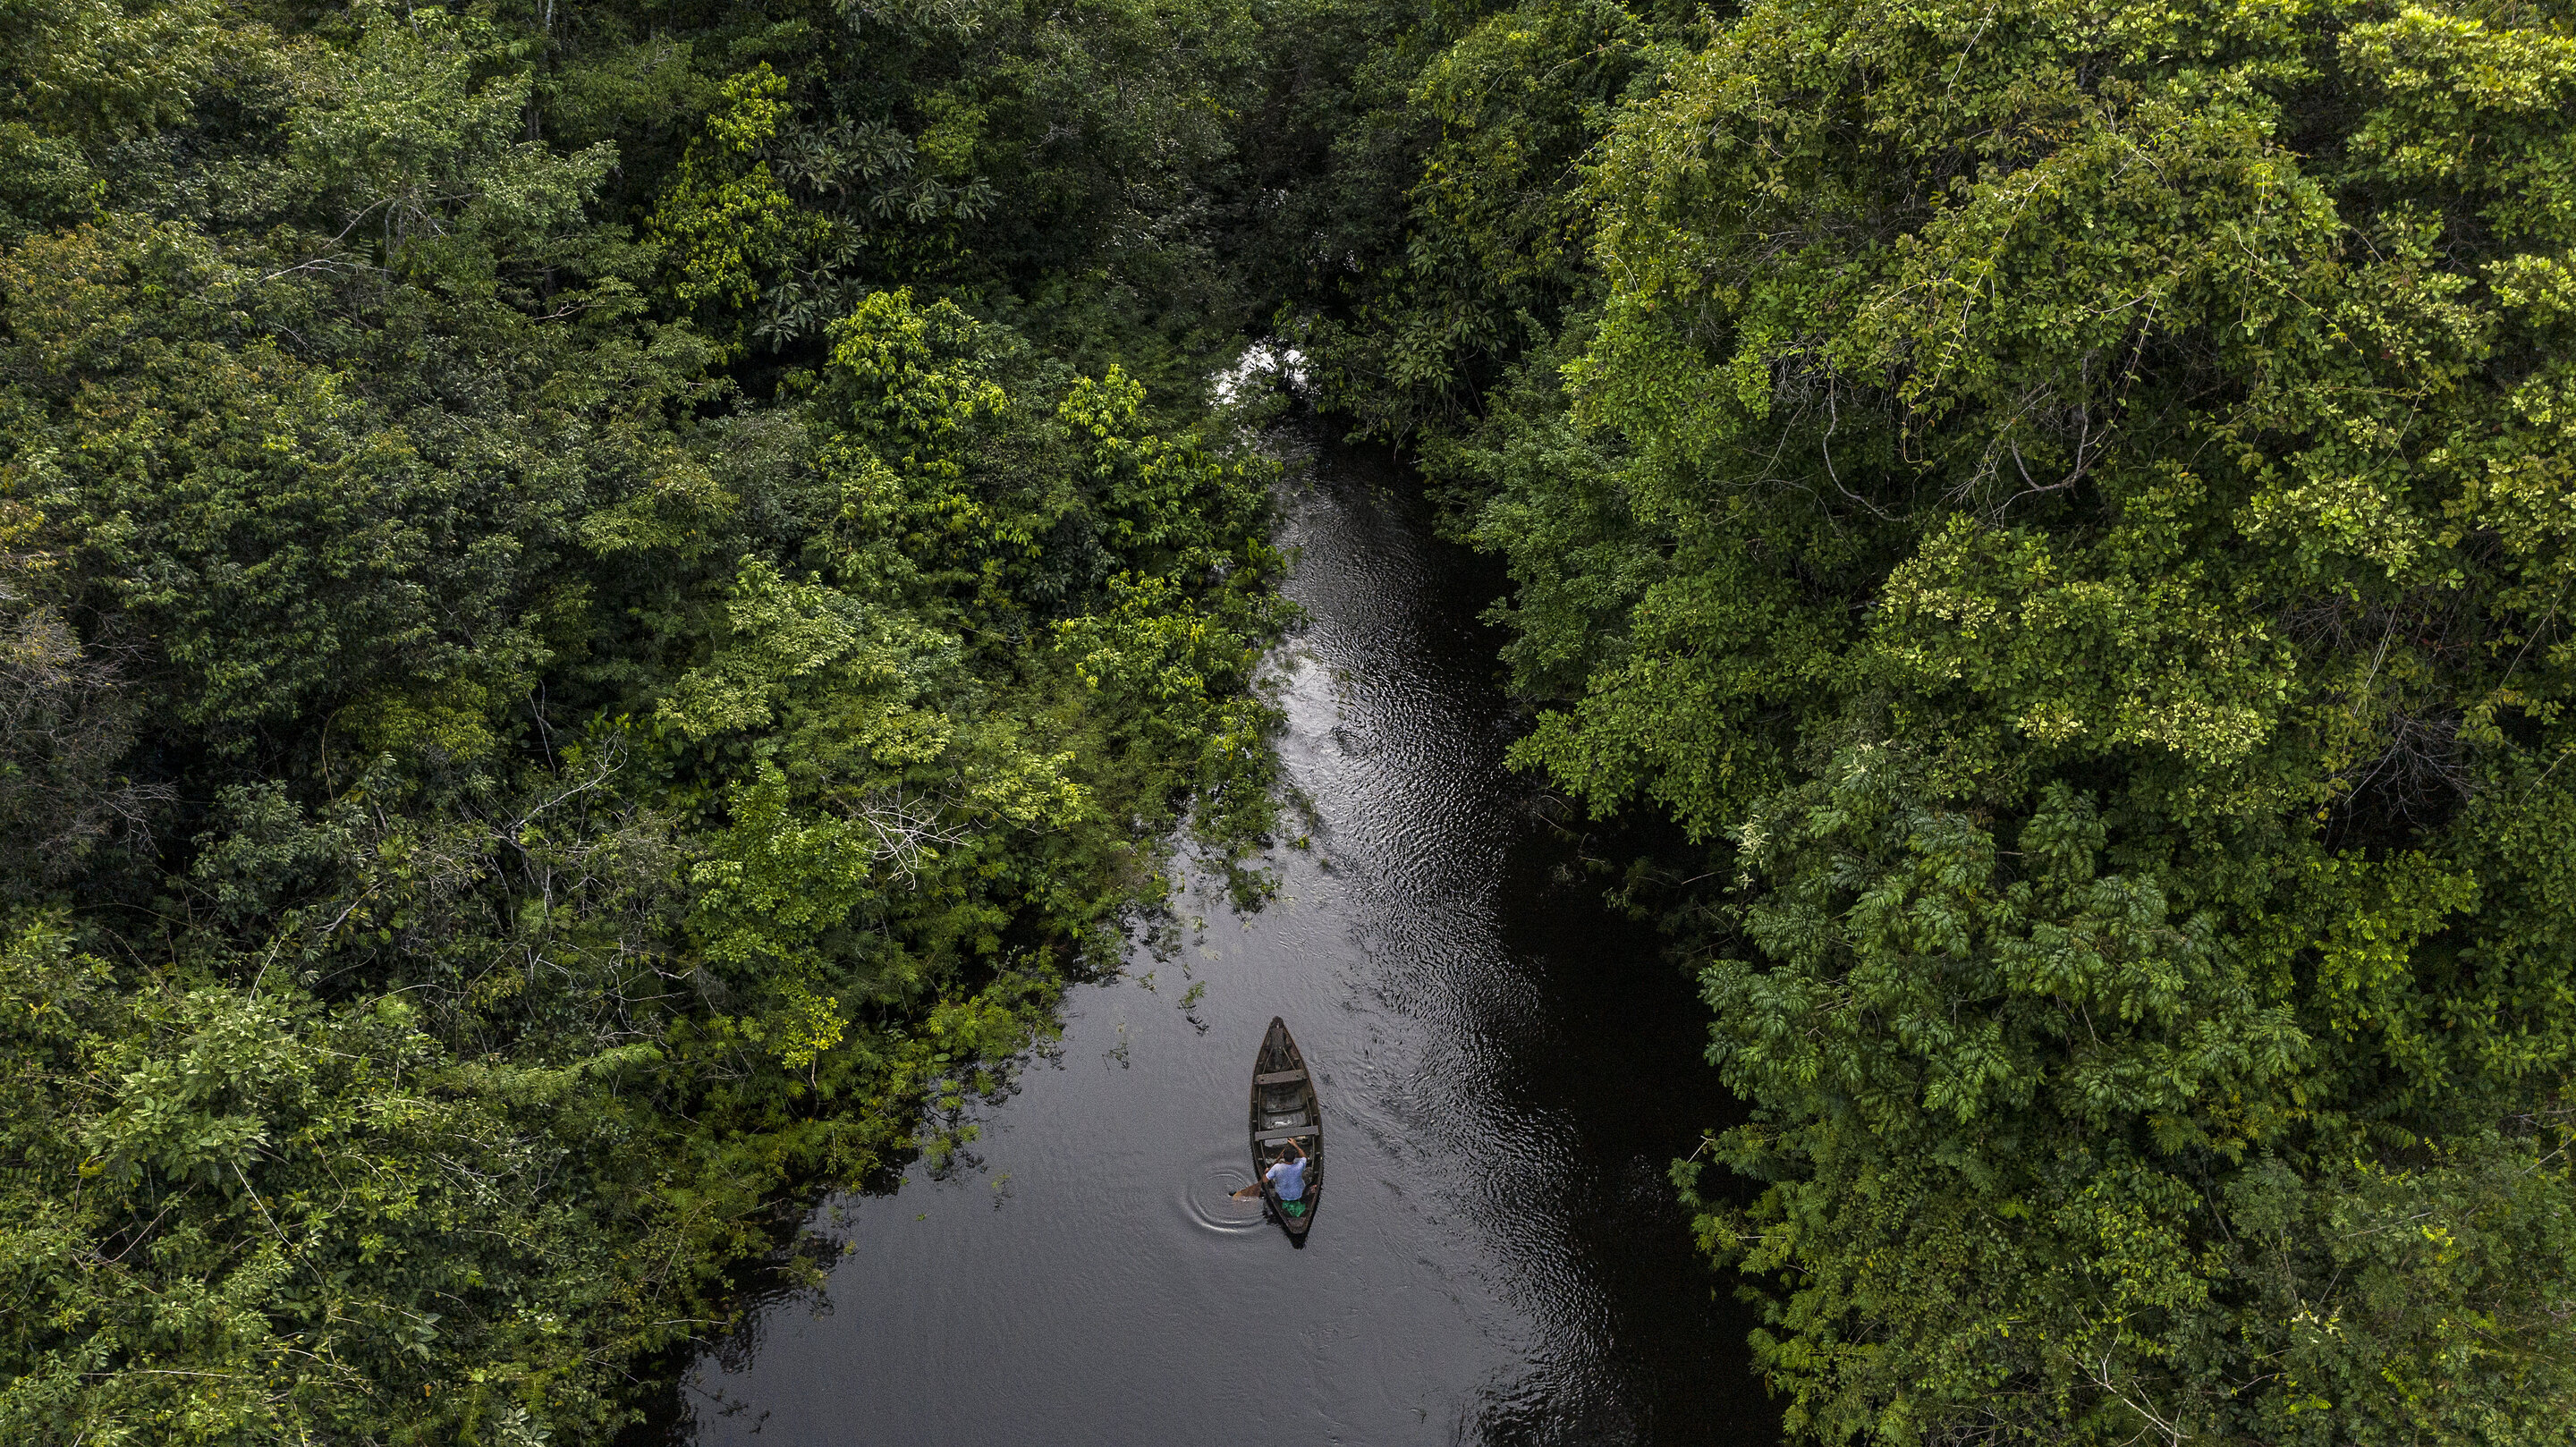 Amazon study shows big conservation gains possible for imperilled freshwater ecosystems